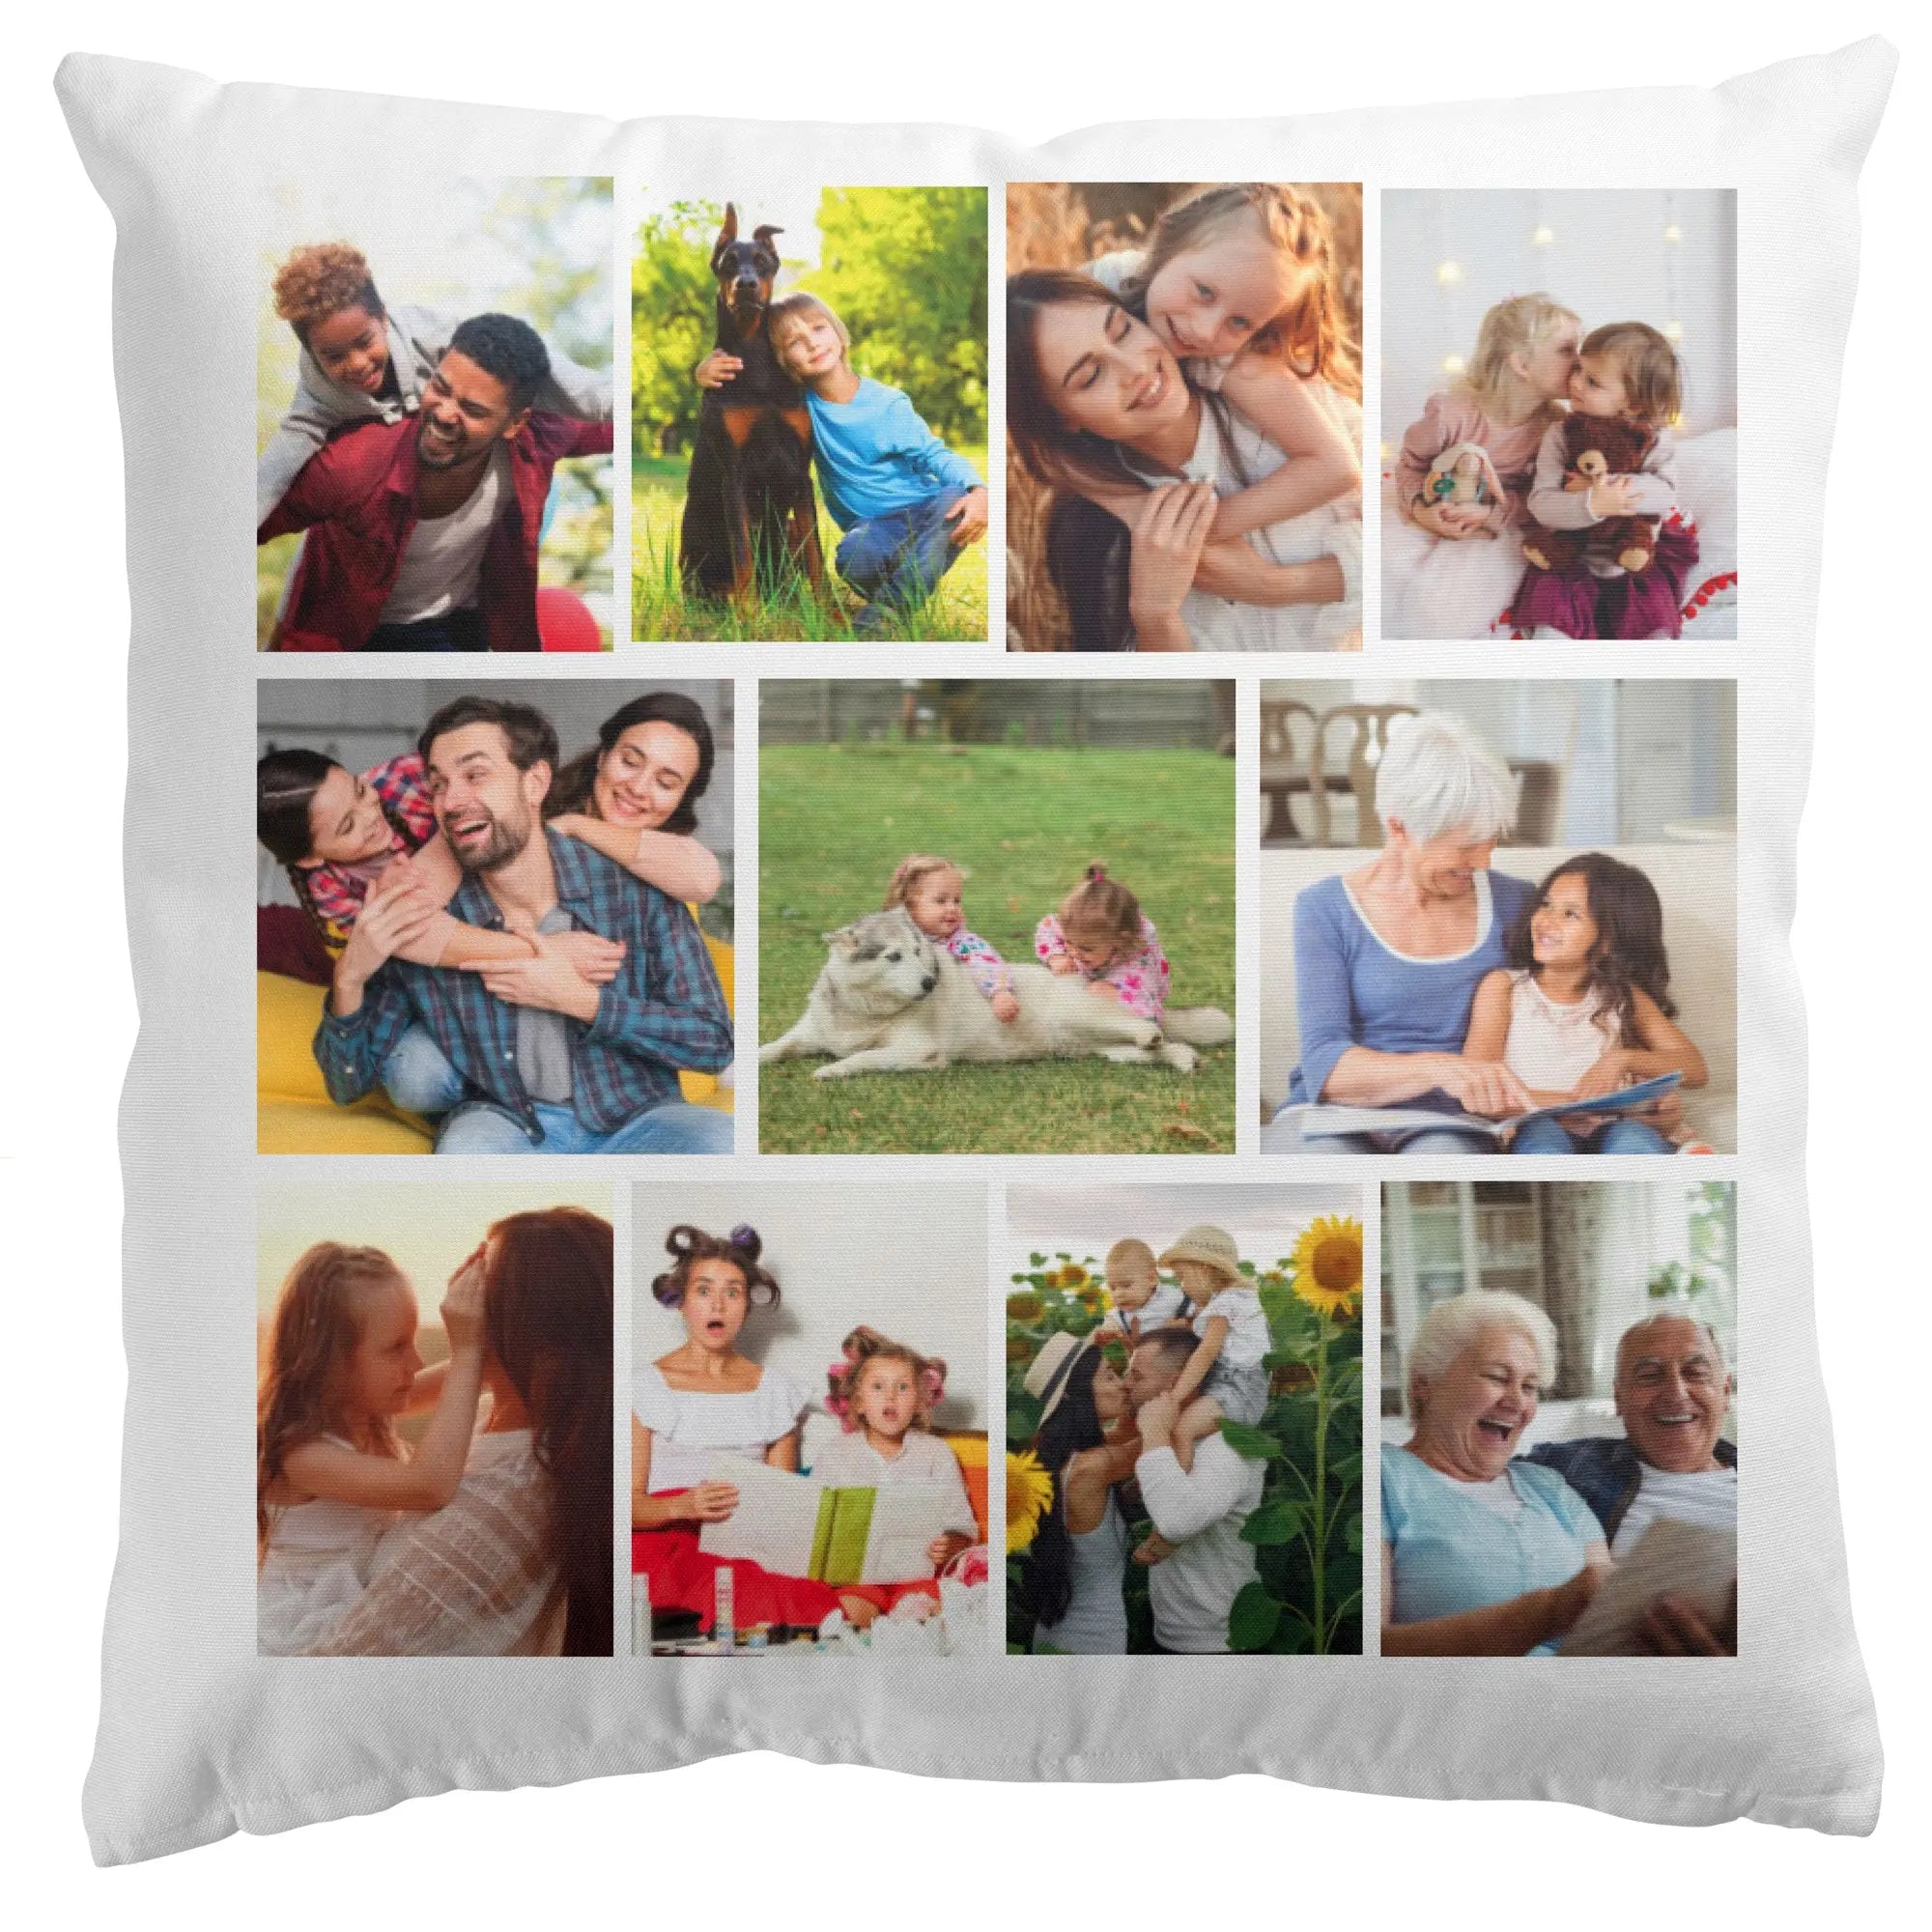 Personalised Collage Style  Cushion Cover  40x40cm  Photo Cushion - 11 Images - CushionPop